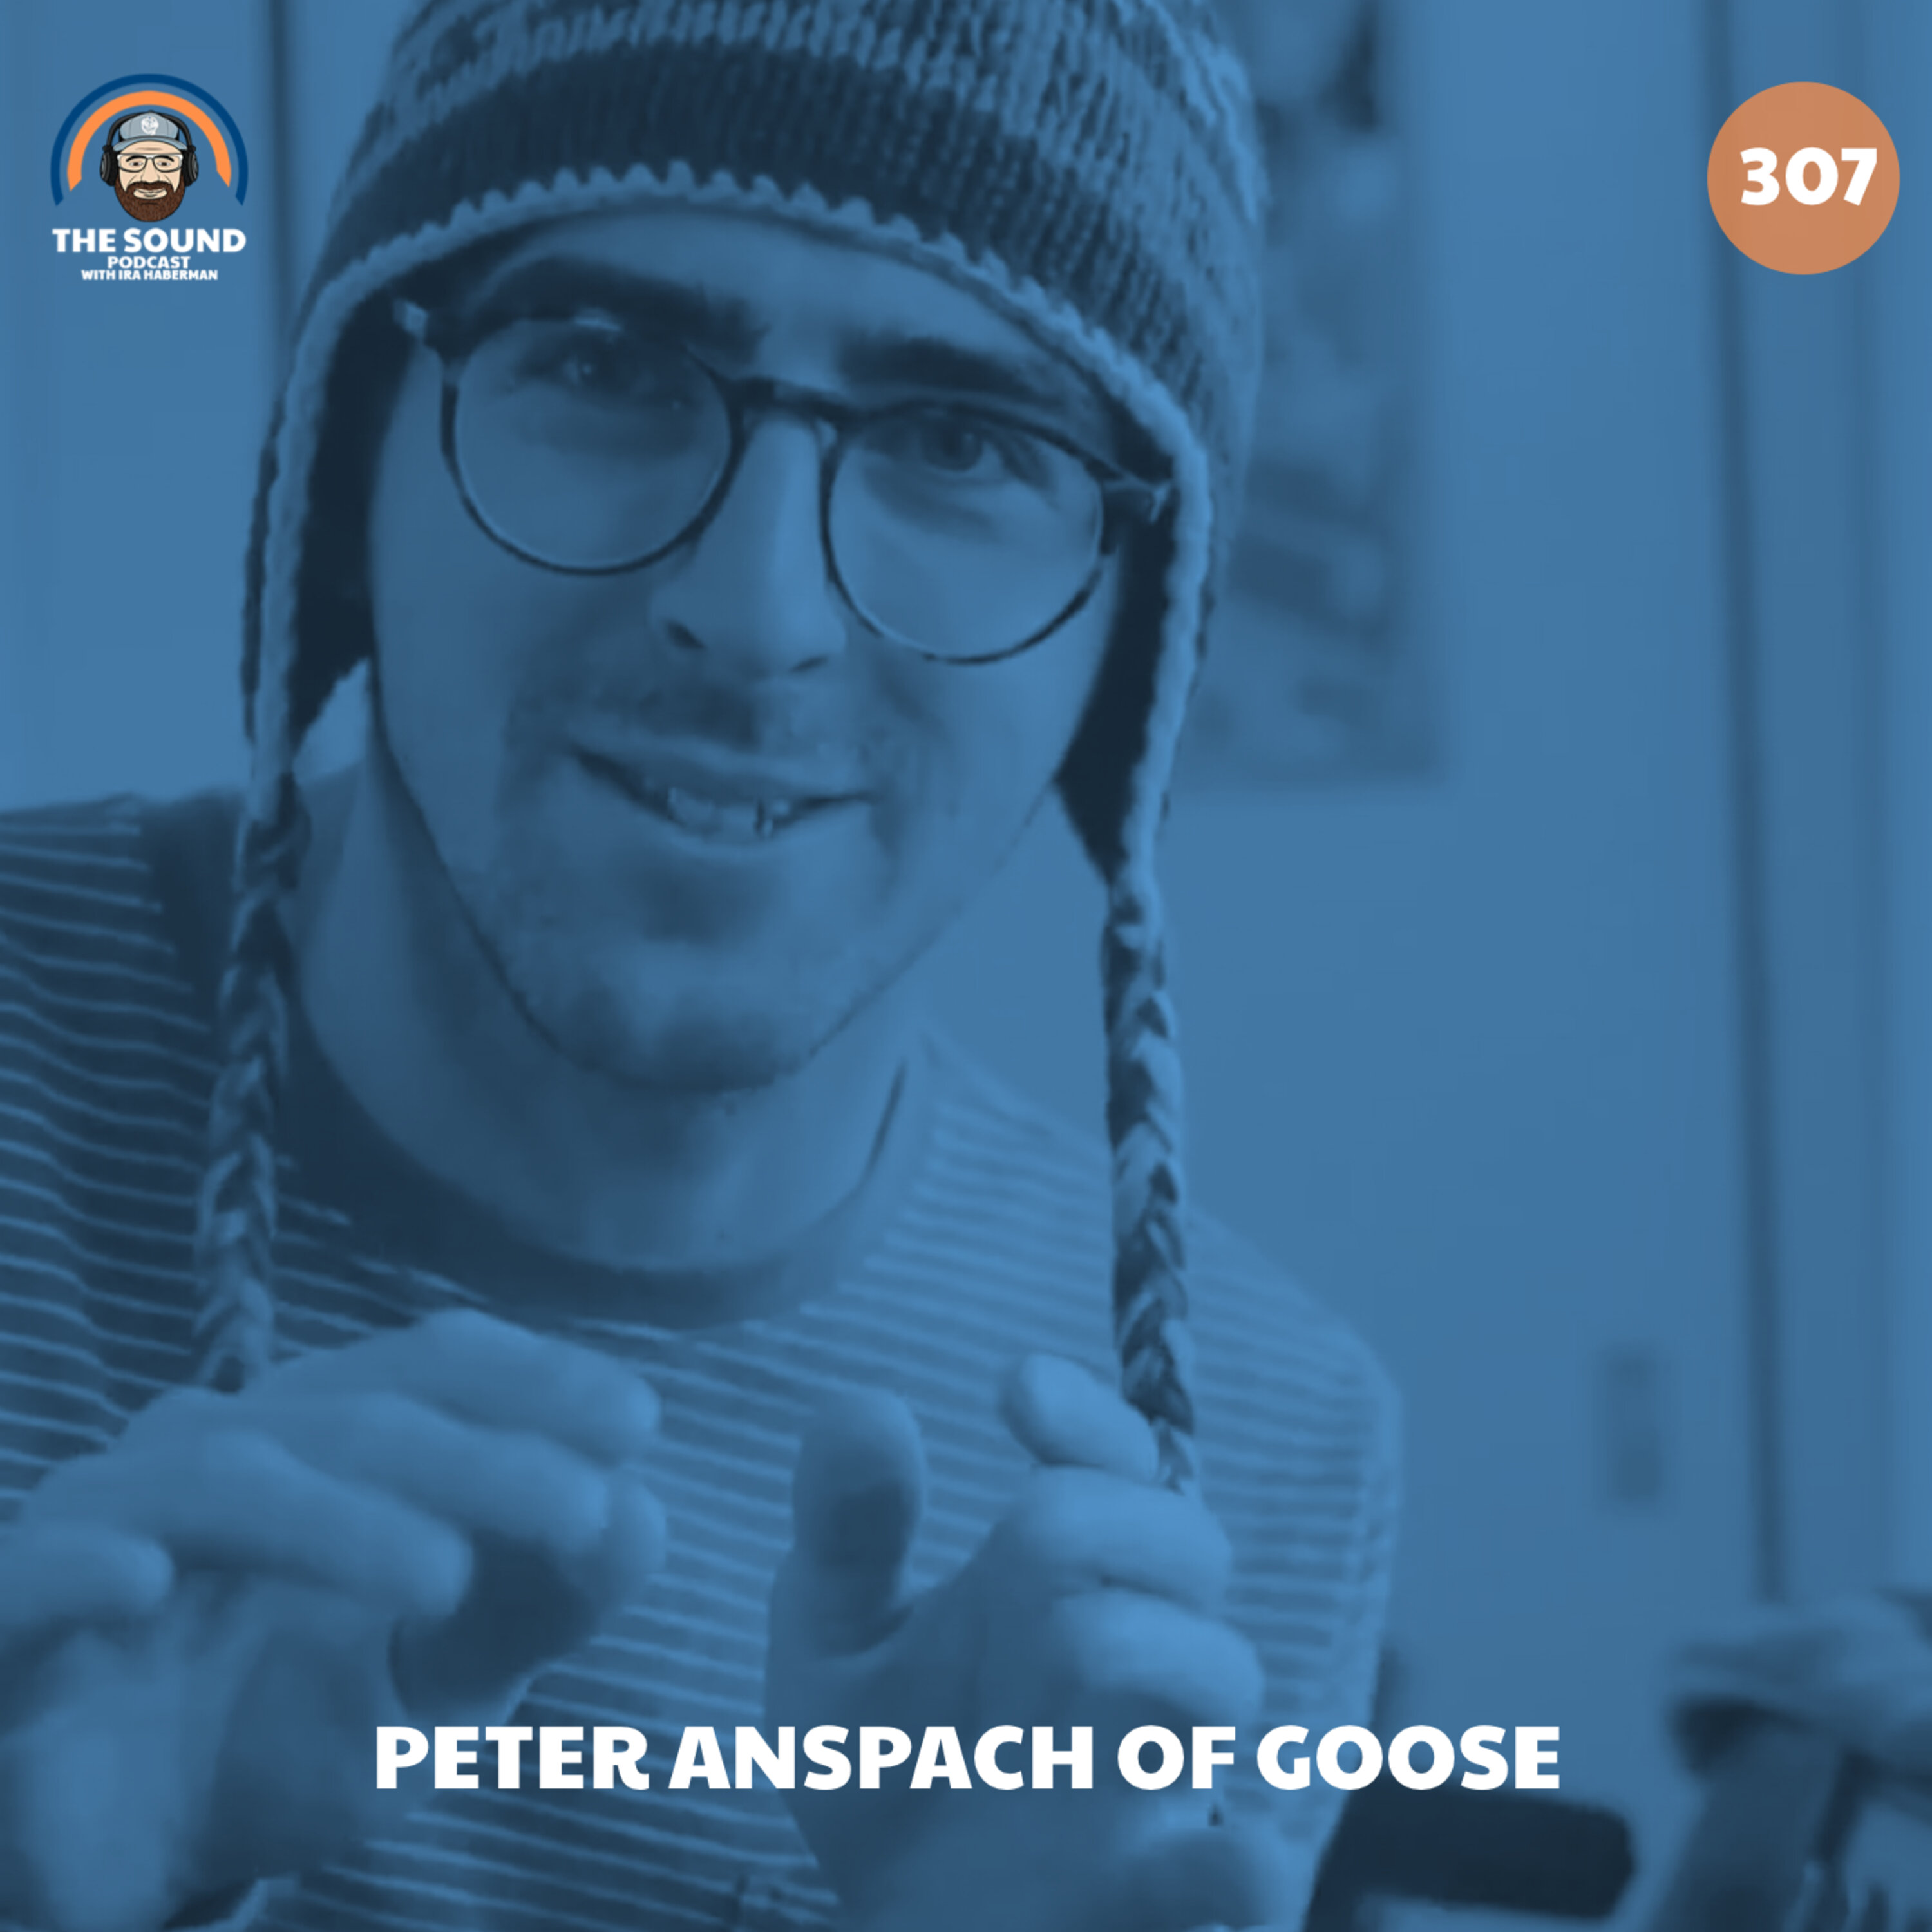 Peter Anspach of Goose Image